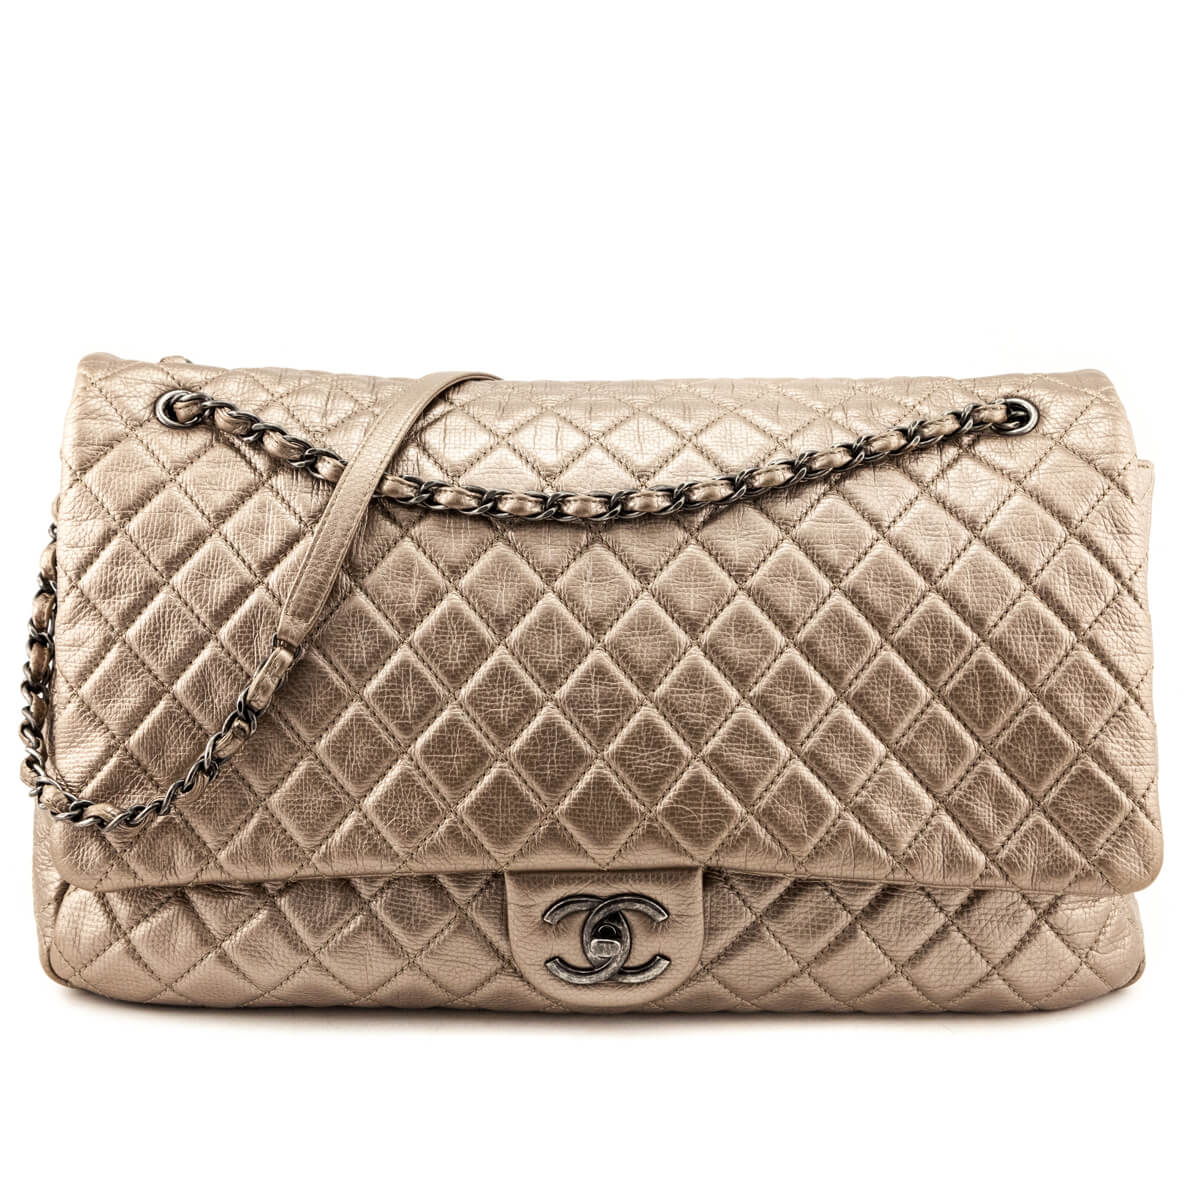 Chanel Pale Gold Metallic Calfskin Quilted XXL Travel Flap Bag - Love that Bag etc - Preowned Authentic Designer Handbags & Preloved Fashions